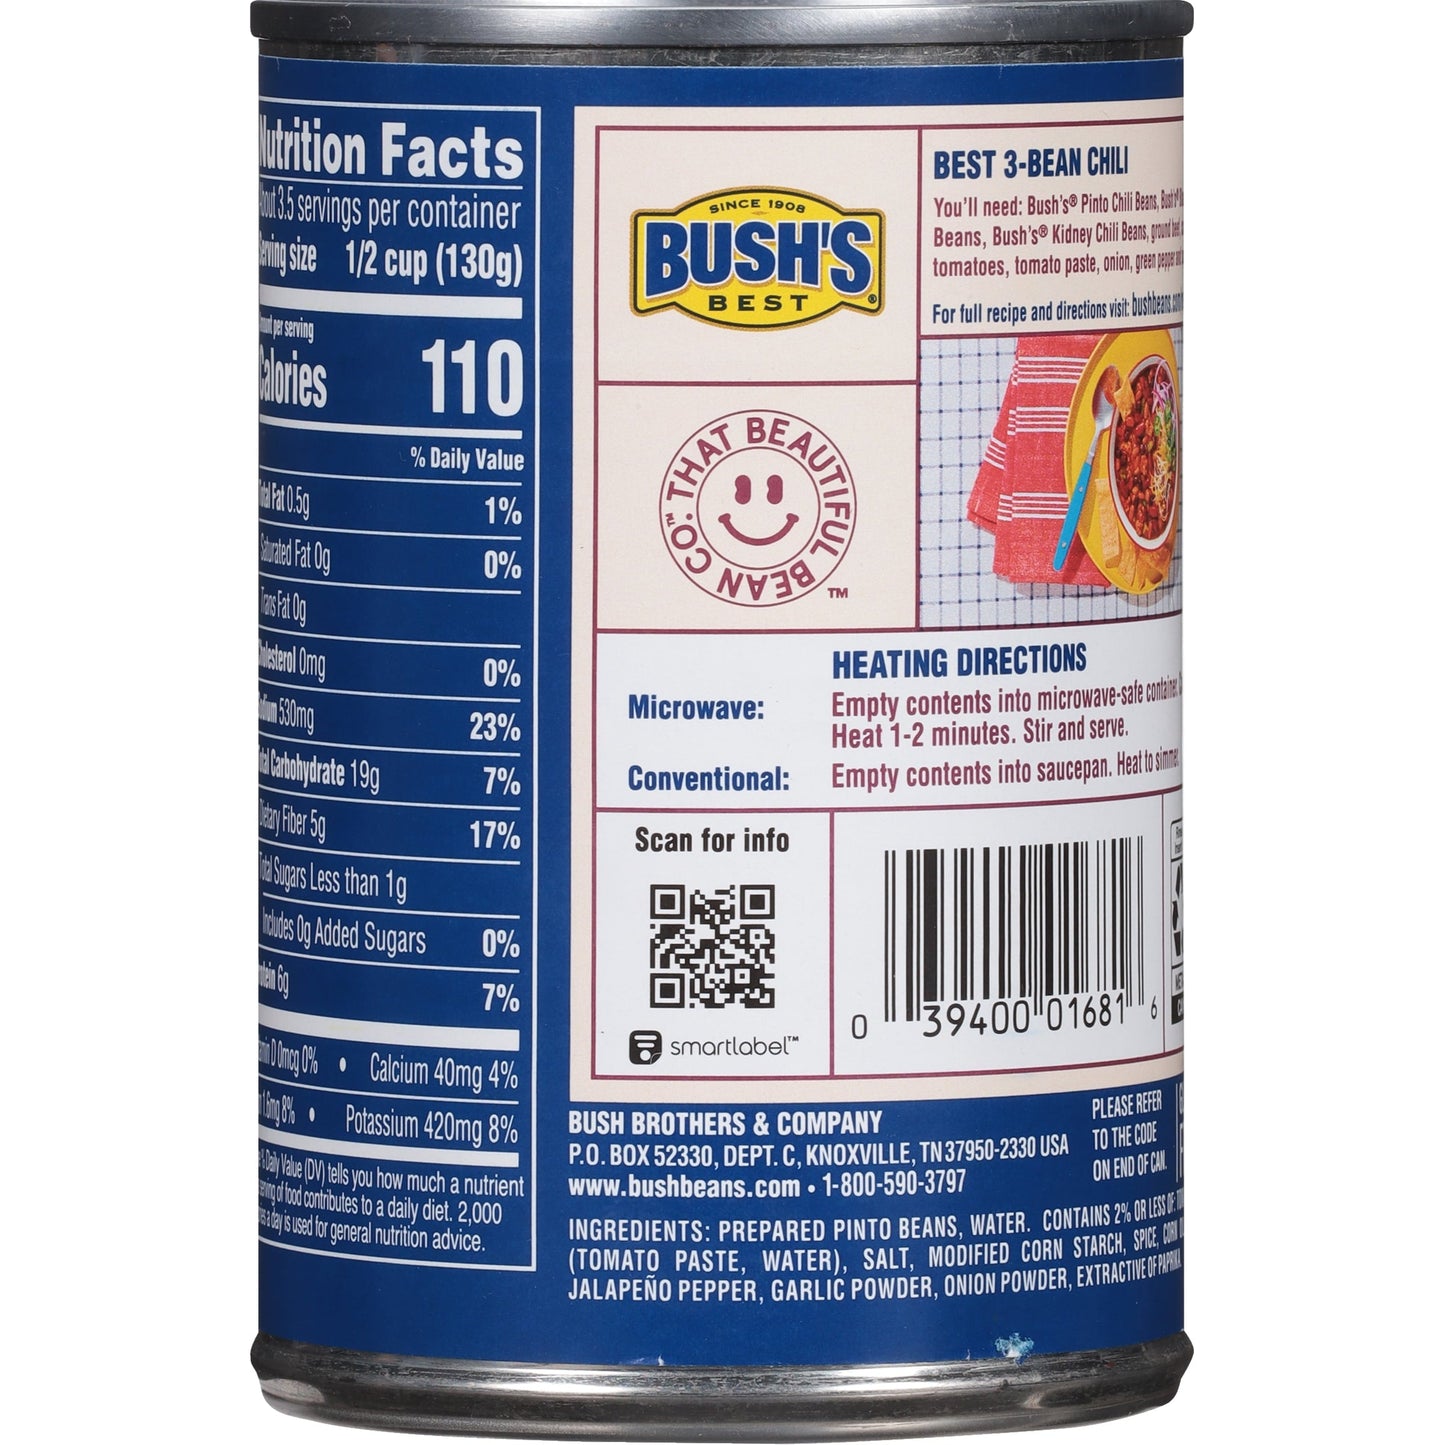 Bush's Chili Beans, Canned Pinto Beans in Hot Chili Sauce, 16 oz Can